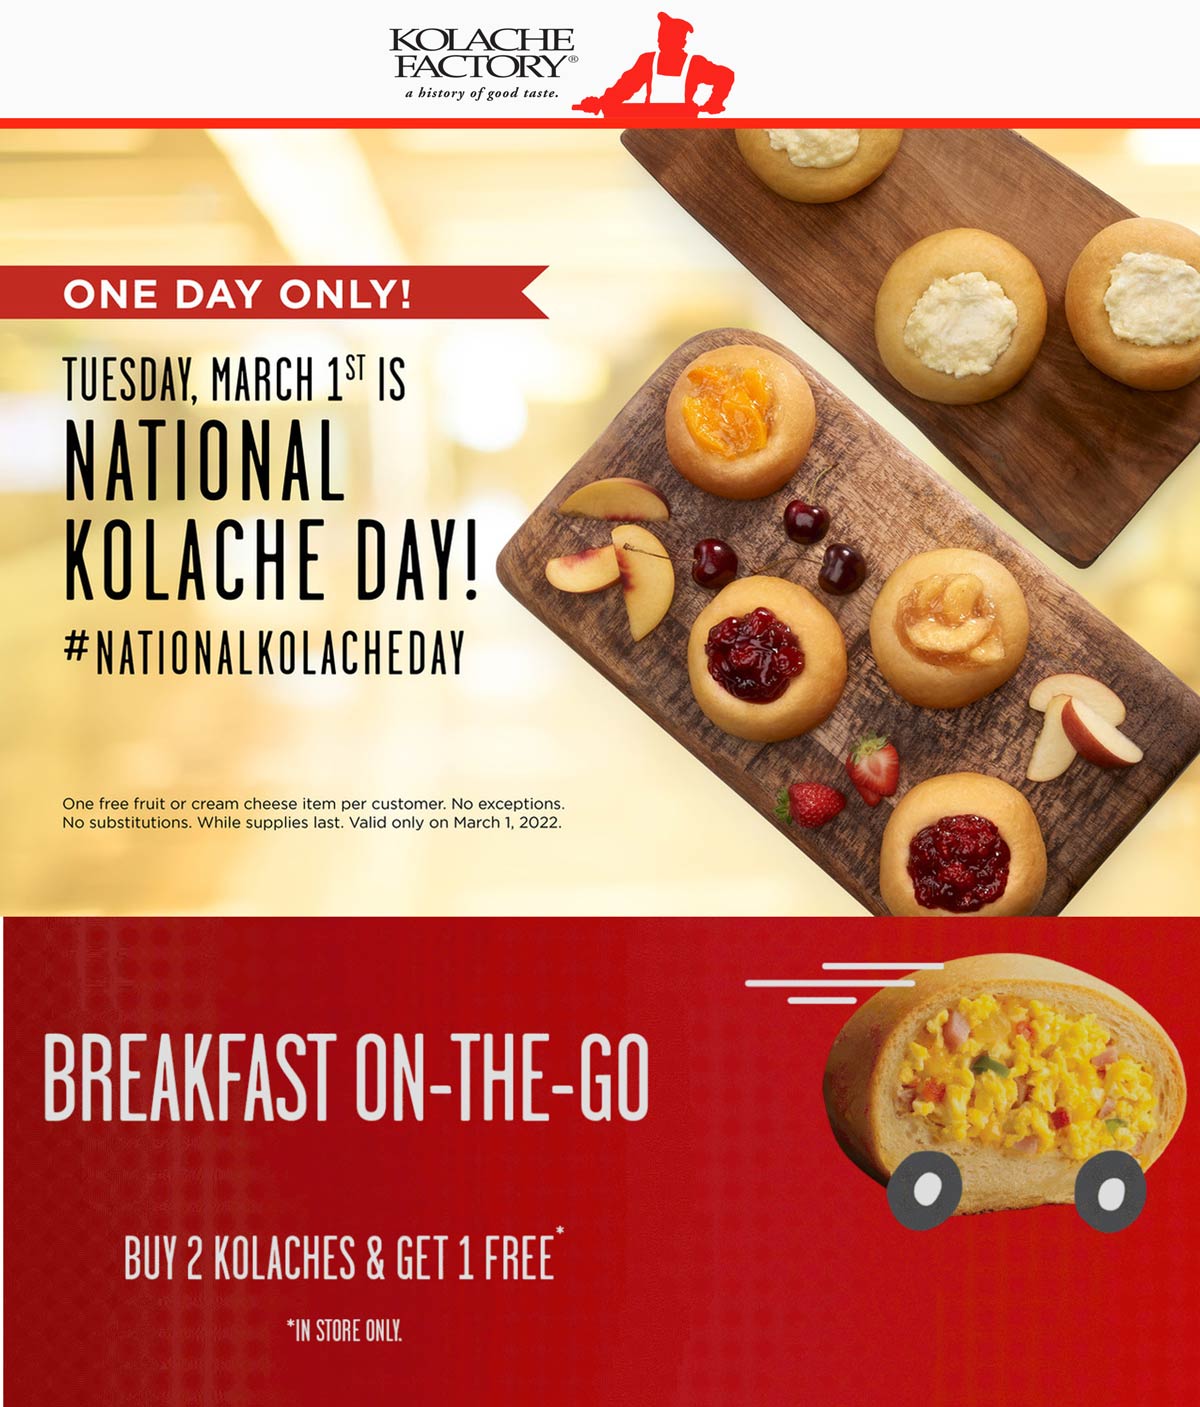 Kolache Factory coupons & promo code for [January 2023]